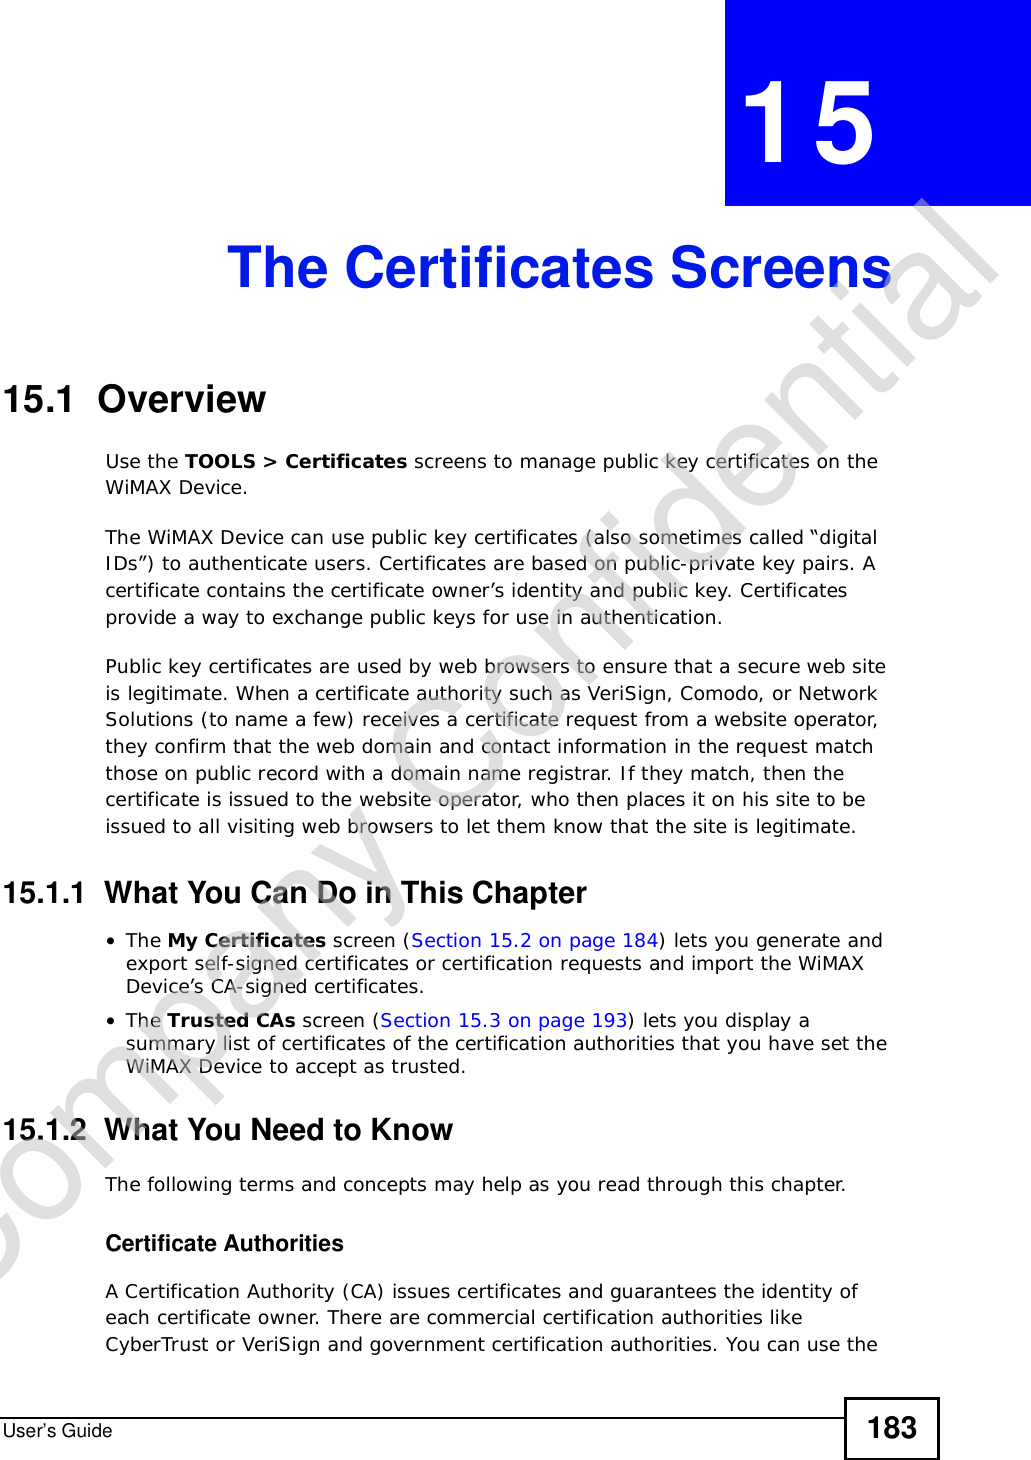 User’s Guide 183CHAPTER 15The Certificates Screens15.1  OverviewUse the TOOLS &gt; Certificates screens to manage public key certificates on the WiMAX Device.The WiMAX Device can use public key certificates (also sometimes called “digital IDs”) to authenticate users. Certificates are based on public-private key pairs. A certificate contains the certificate owner’s identity and public key. Certificates provide a way to exchange public keys for use in authentication.Public key certificates are used by web browsers to ensure that a secure web site is legitimate. When a certificate authority such as VeriSign, Comodo, or Network Solutions (to name a few) receives a certificate request from a website operator, they confirm that the web domain and contact information in the request match those on public record with a domain name registrar. If they match, then the certificate is issued to the website operator, who then places it on his site to be issued to all visiting web browsers to let them know that the site is legitimate.15.1.1  What You Can Do in This Chapter•The My Certificates screen (Section 15.2 on page 184) lets you generate and export self-signed certificates or certification requests and import the WiMAX Device’s CA-signed certificates.•The Trusted CAs screen (Section 15.3 on page 193) lets you display a summary list of certificates of the certification authorities that you have set the WiMAX Device to accept as trusted.15.1.2  What You Need to KnowThe following terms and concepts may help as you read through this chapter.Certificate AuthoritiesA Certification Authority (CA) issues certificates and guarantees the identity of each certificate owner. There are commercial certification authorities like CyberTrust or VeriSign and government certification authorities. You can use the Company Confidential